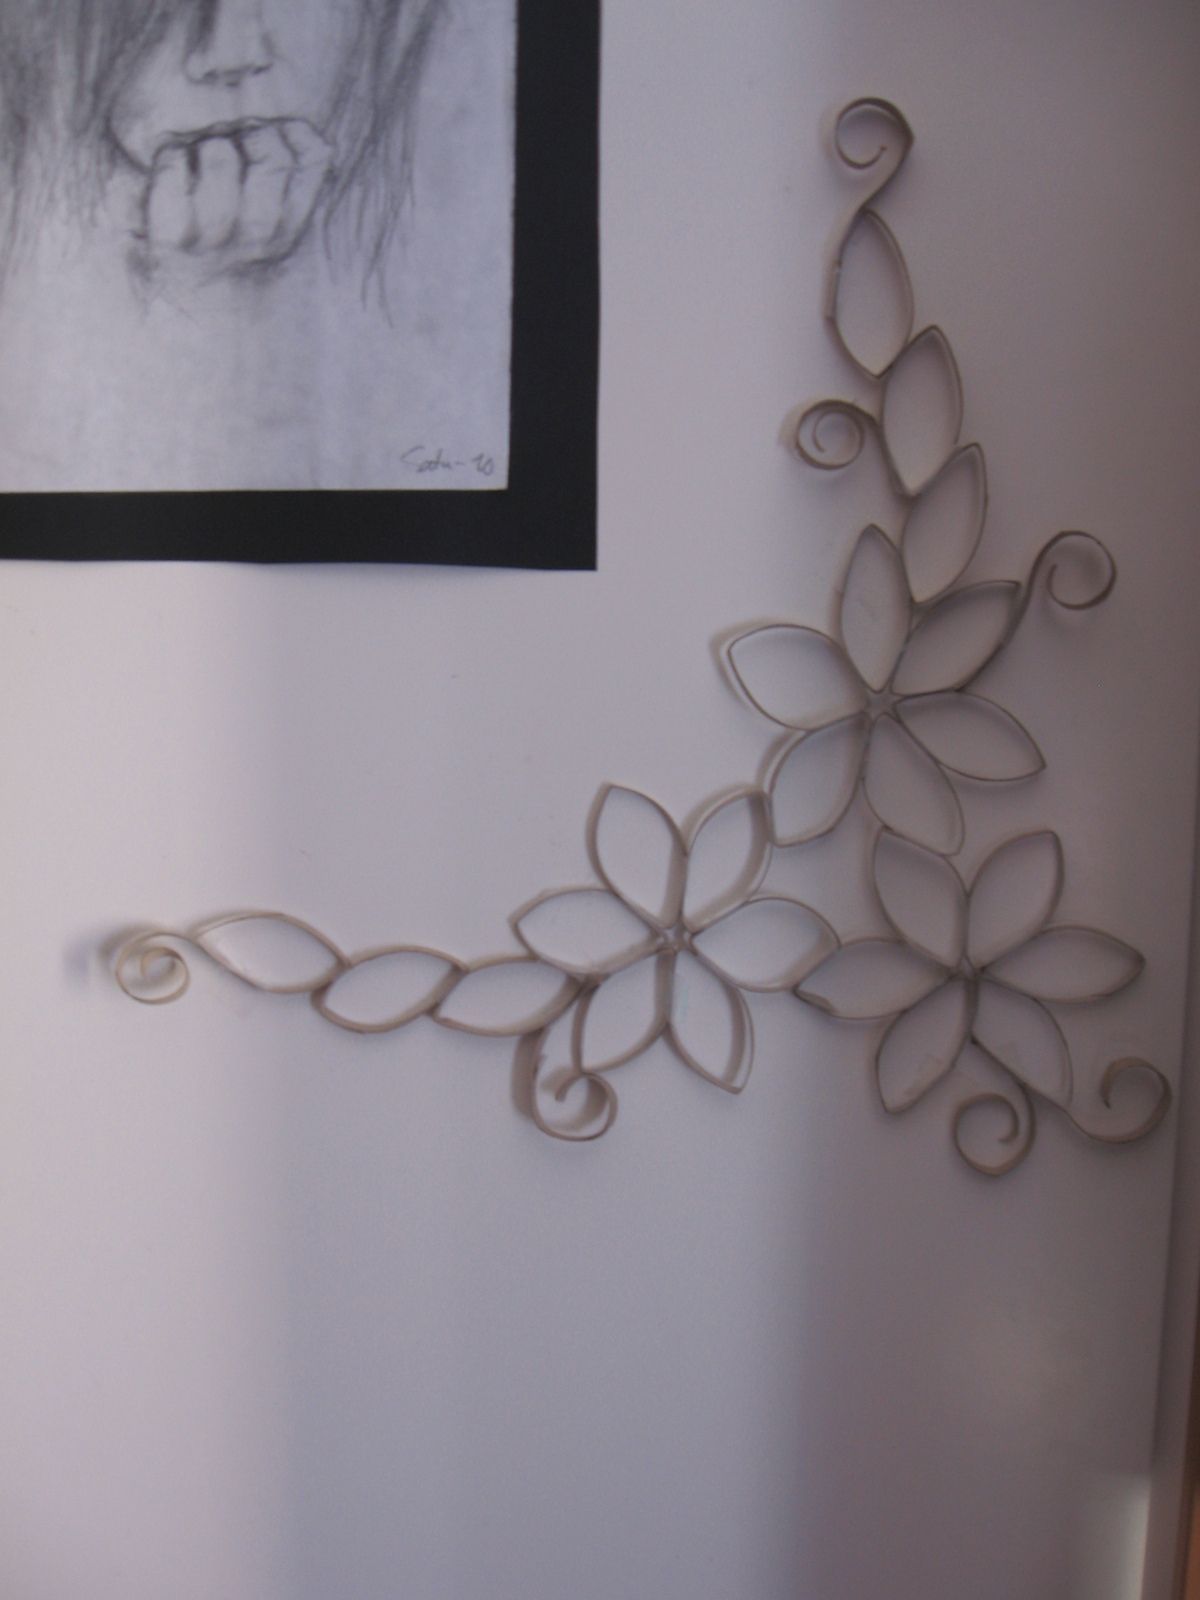 Toilet Paper Roll Wall Art I always wanted to do something decorous with toilet paper